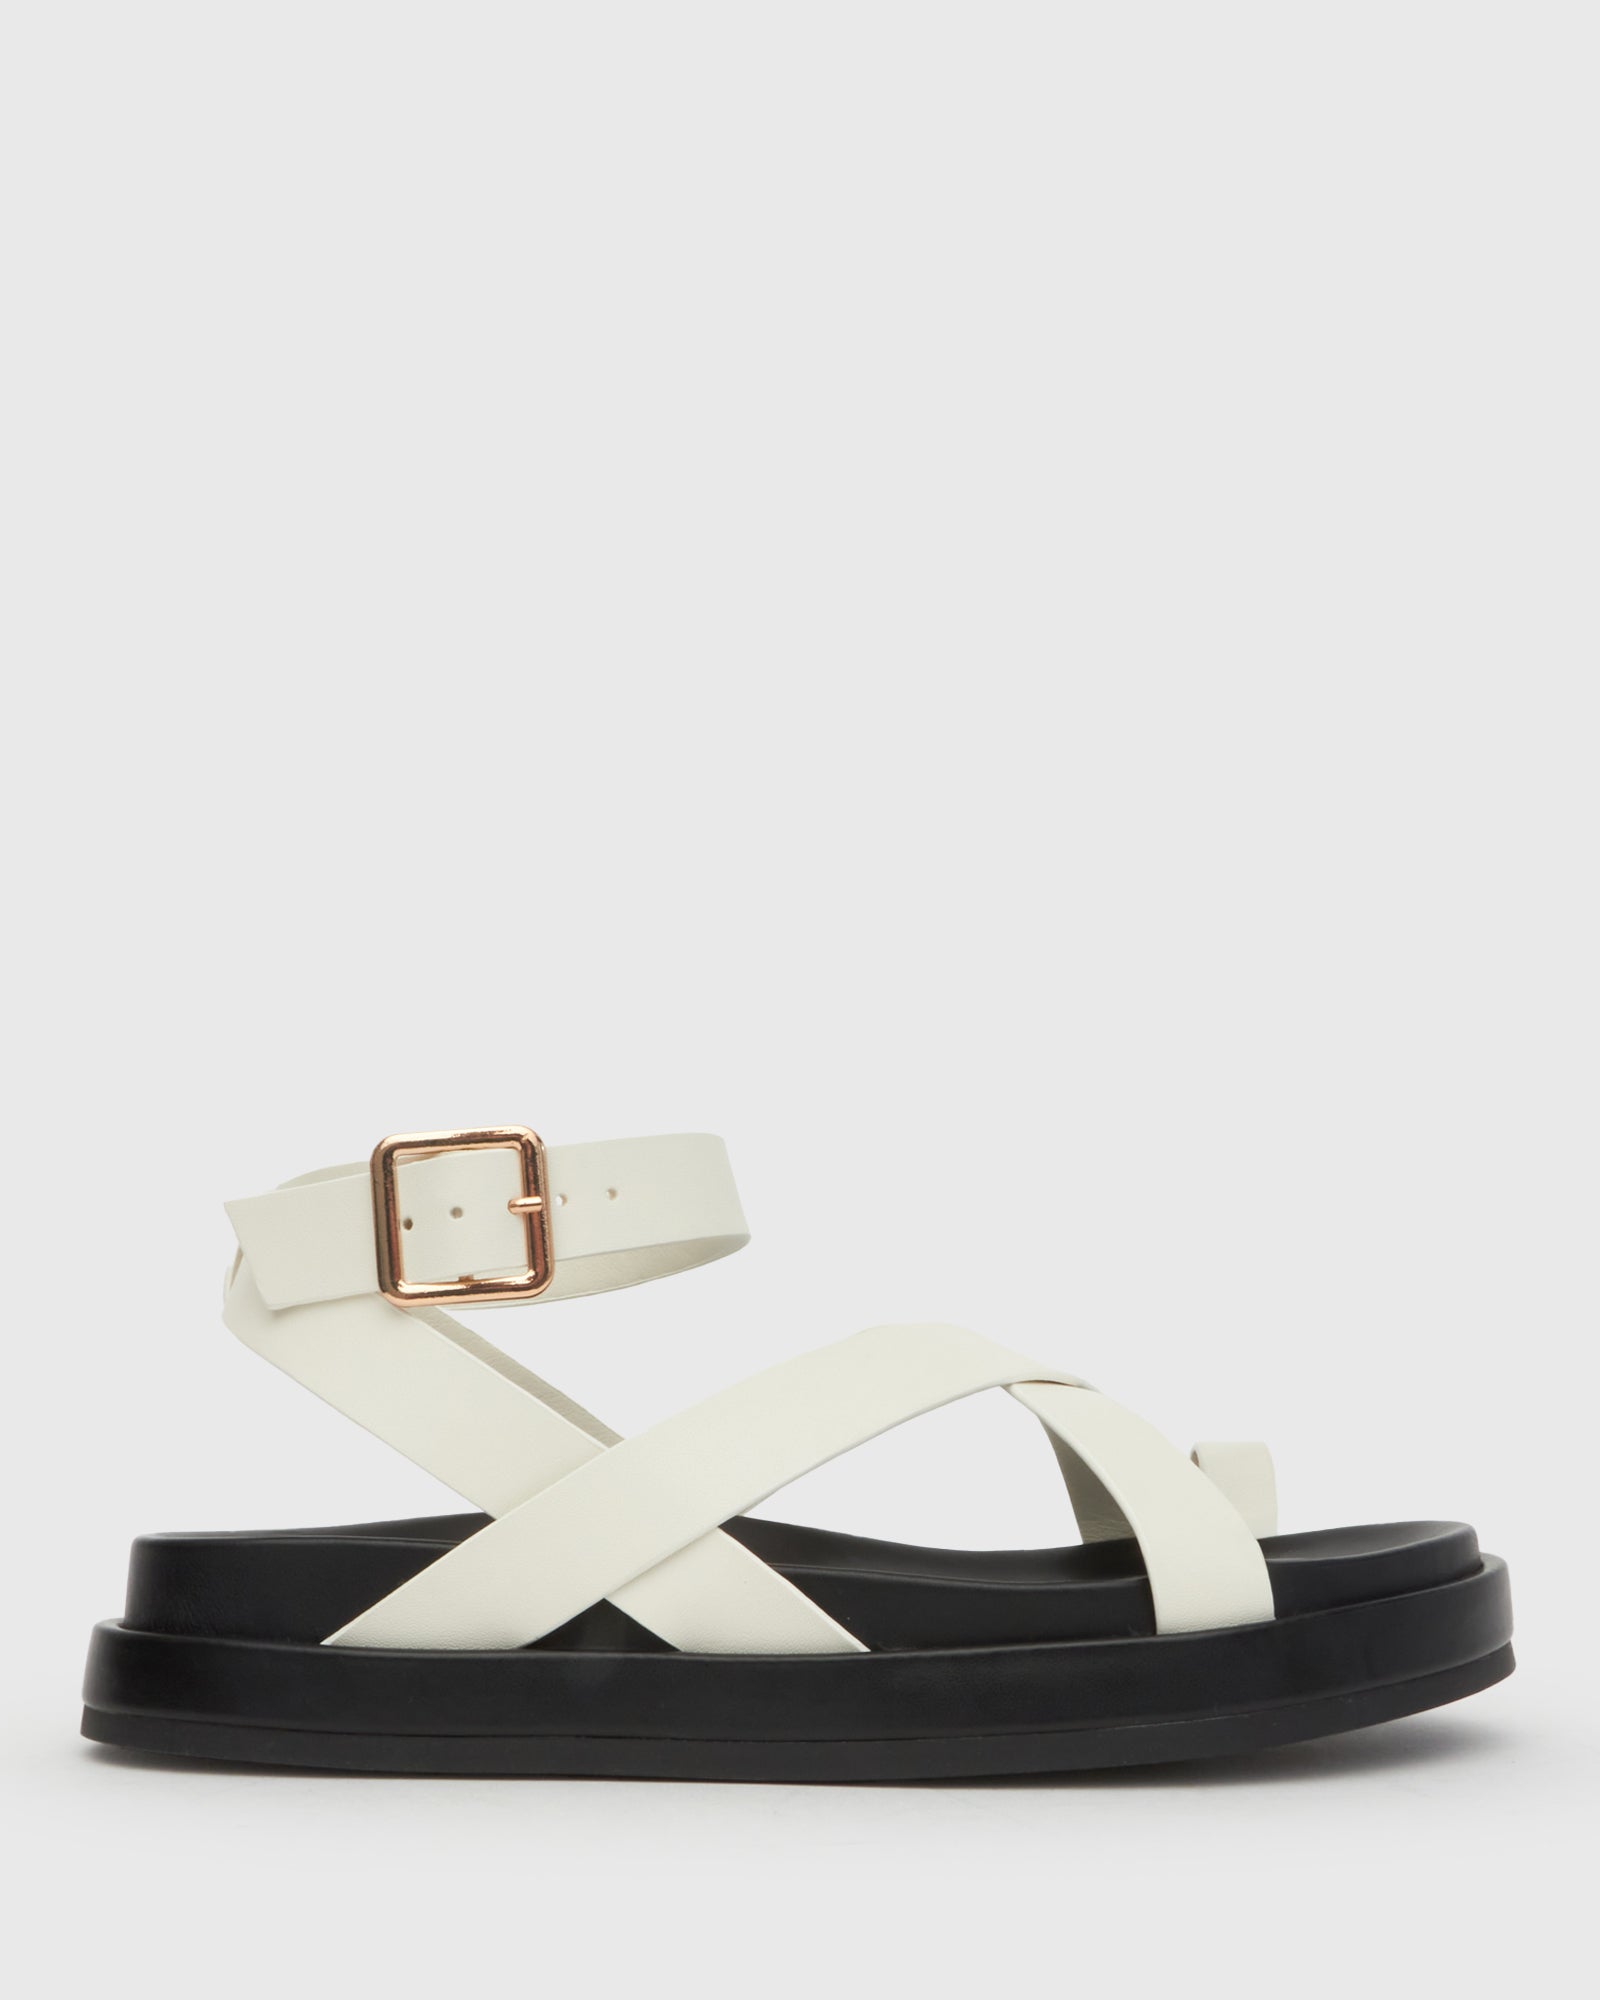 Buy BRISTOL Casual Footbed Sandals by Betts online - Betts